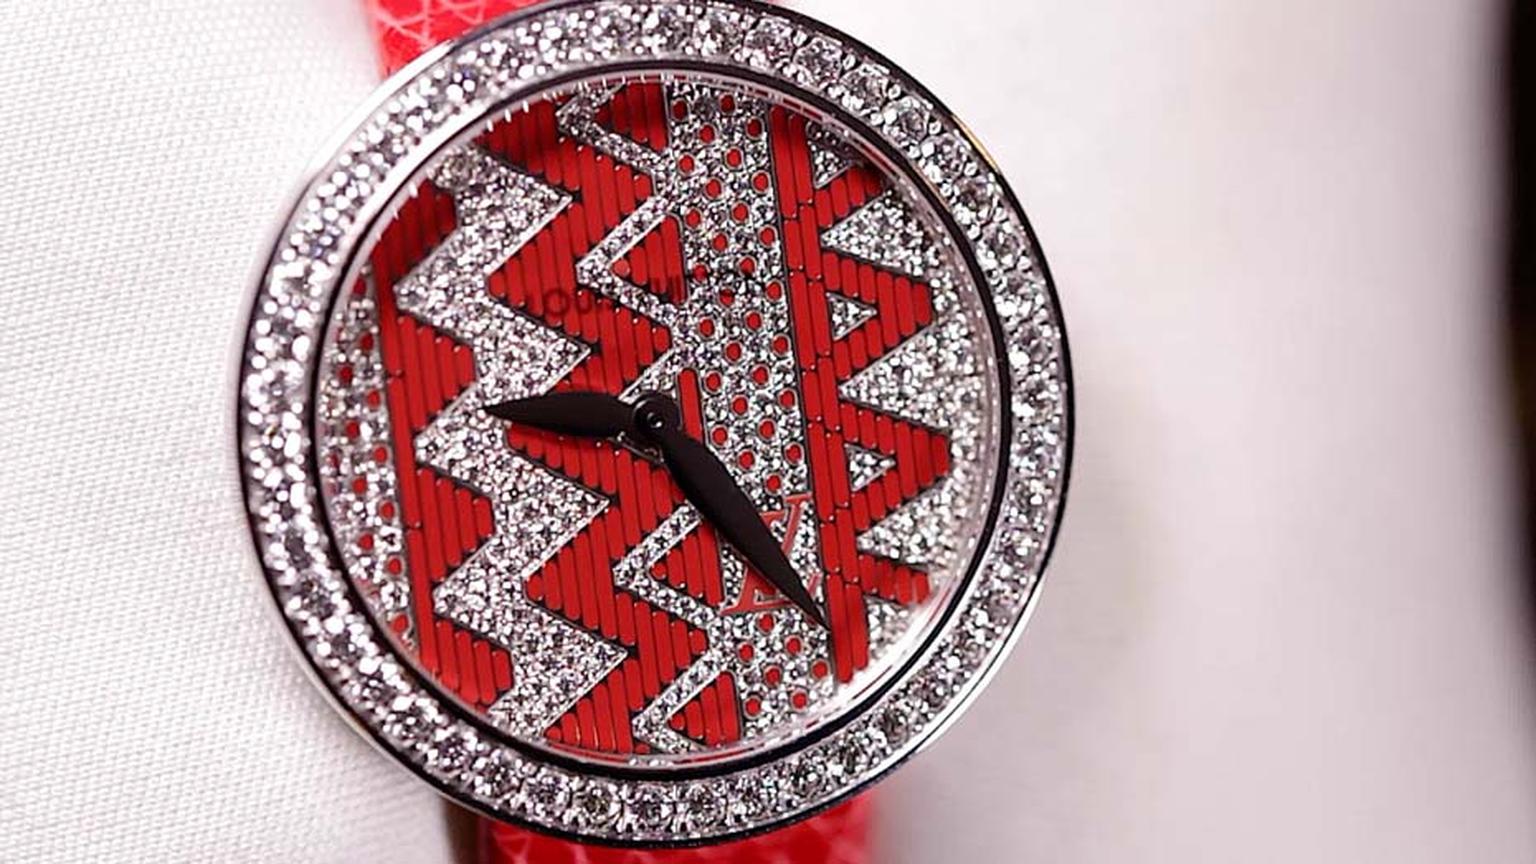 Louis Vuitton’s new Chevron ladies' watch in red lacquer and diamonds was created under the guidance of creative director Nicolas Ghesquiere, whose Summer 2015 ready-to-wear collection incorporated the famous Monogram V.